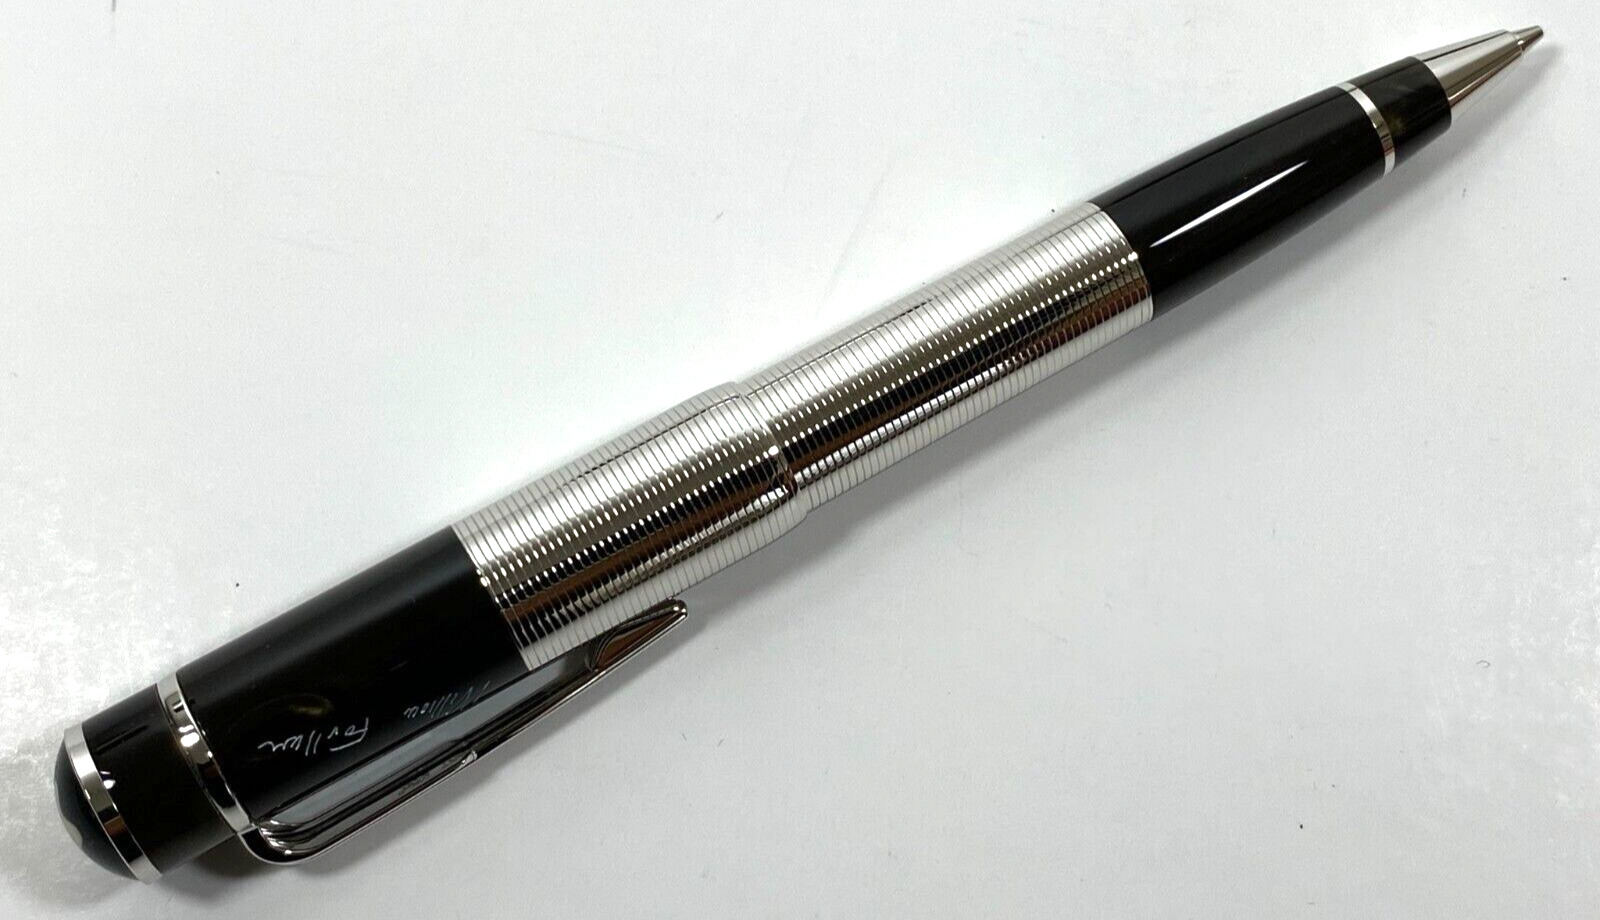 NEW MONTBLANC WILLIAM FAULKNER WRITERS EDITION BALL POINT PEN